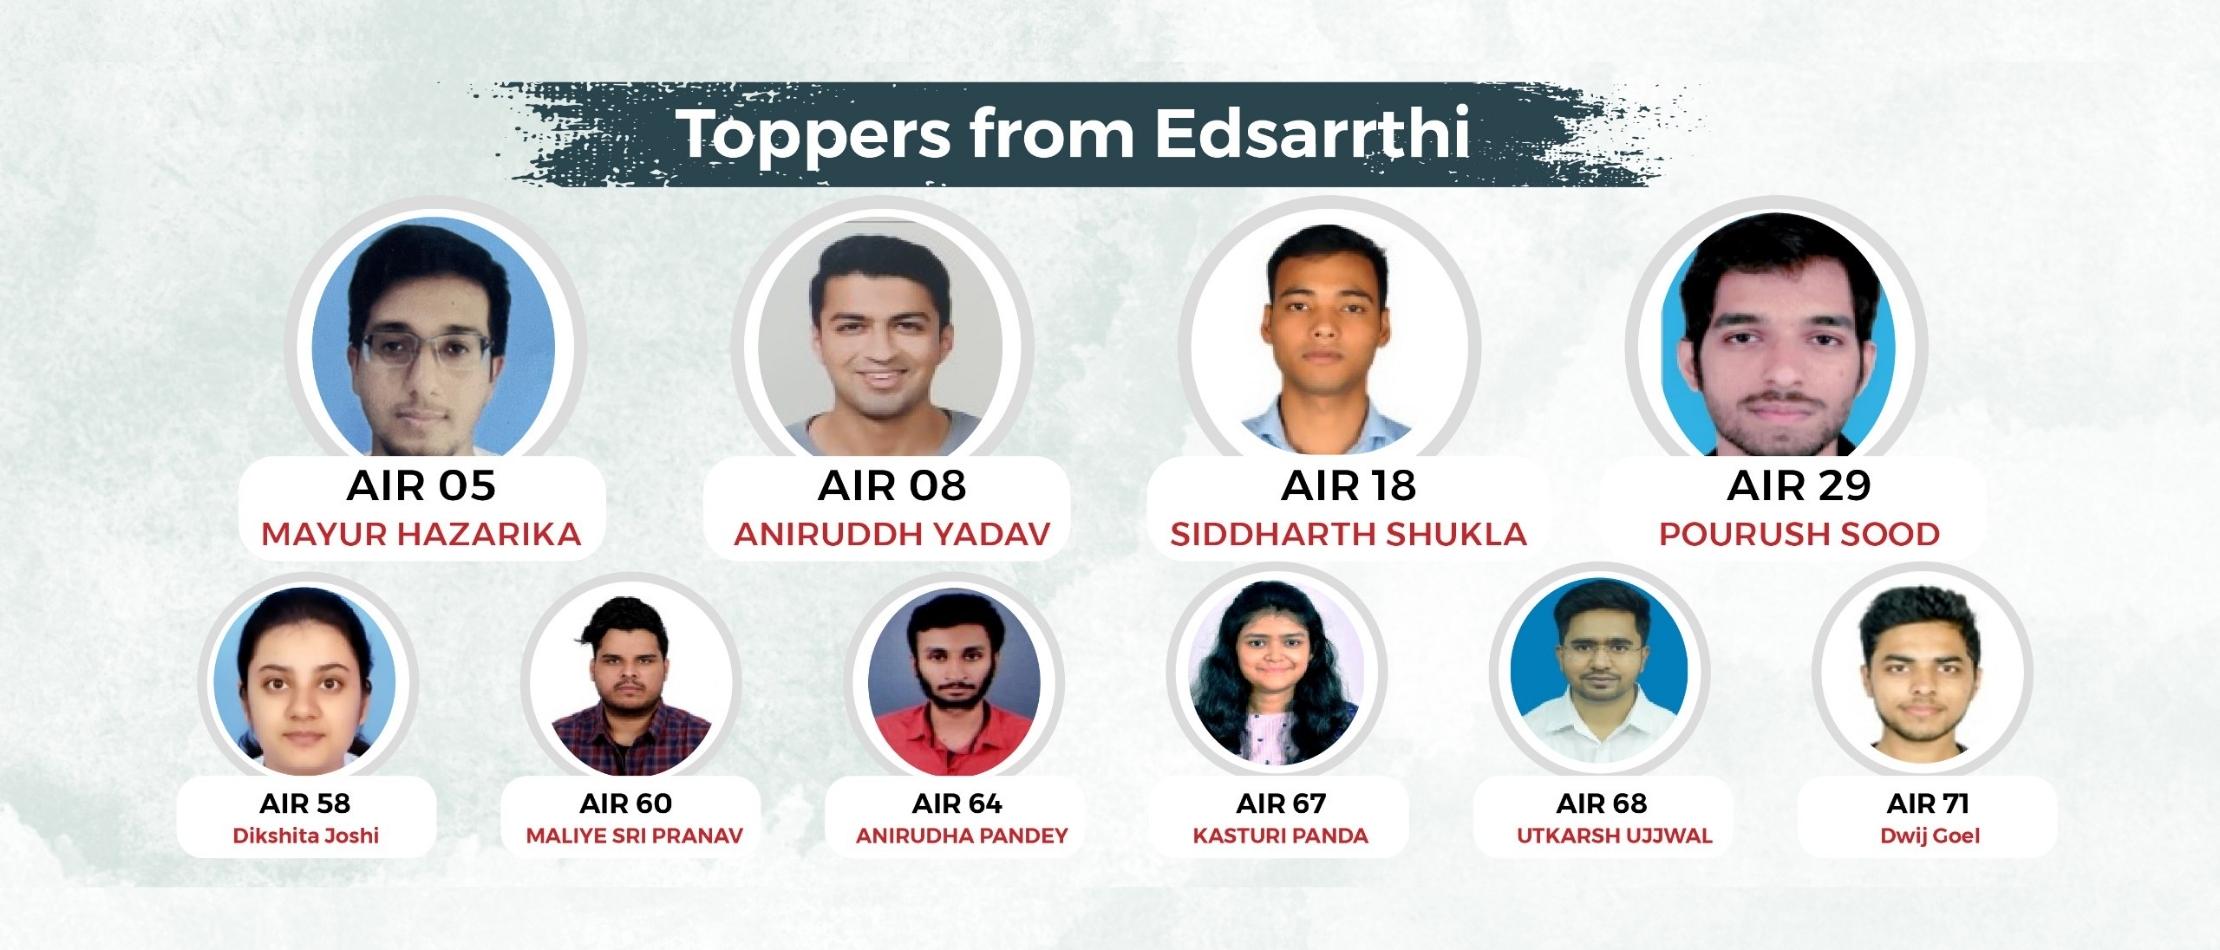 edsarrthi-toppers